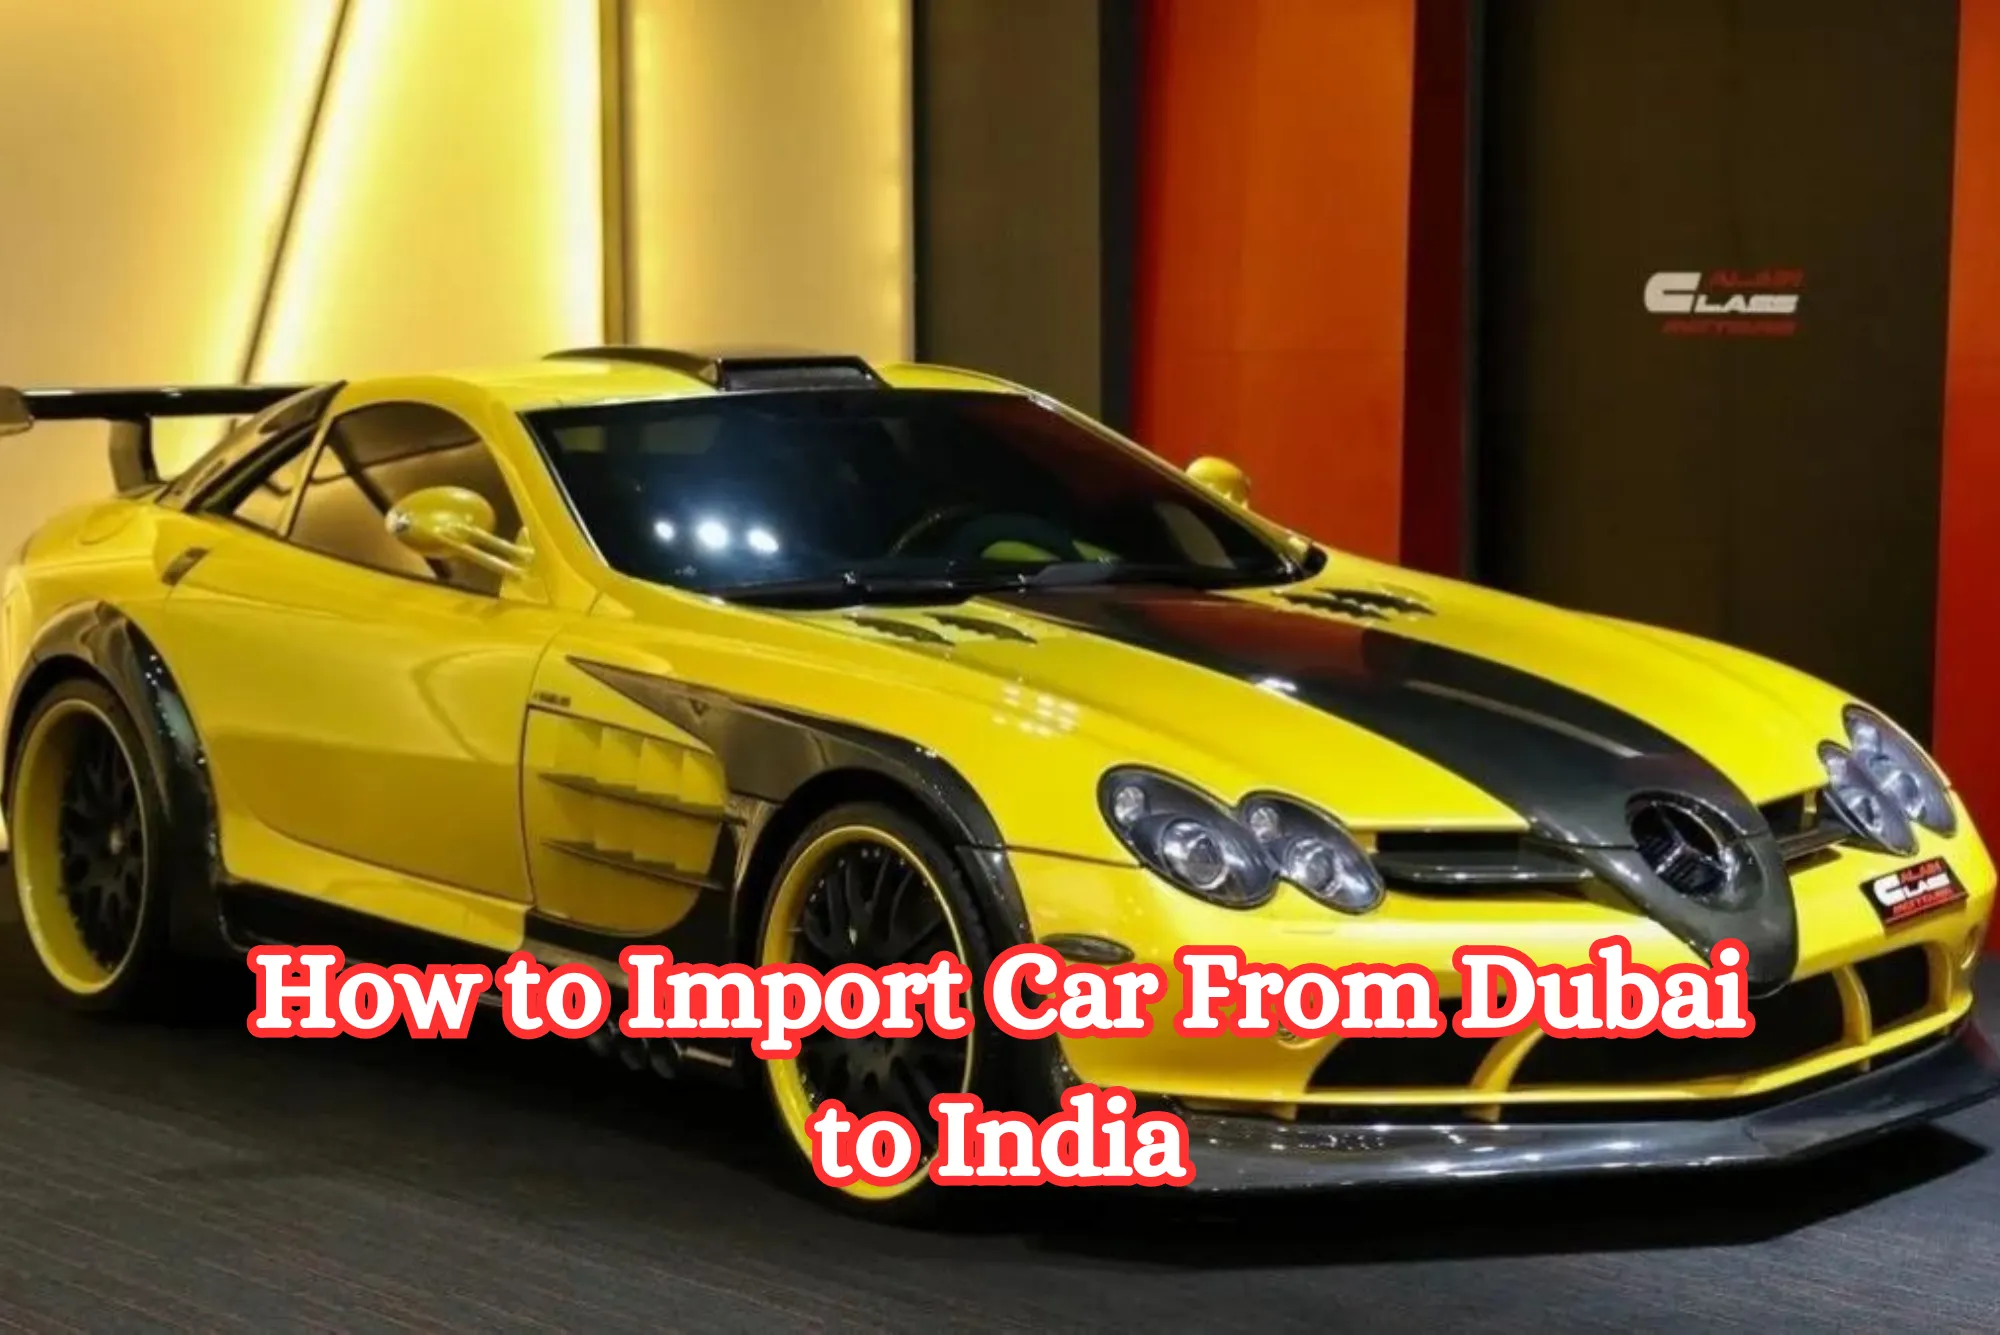 How to Import Car From Dubai to India